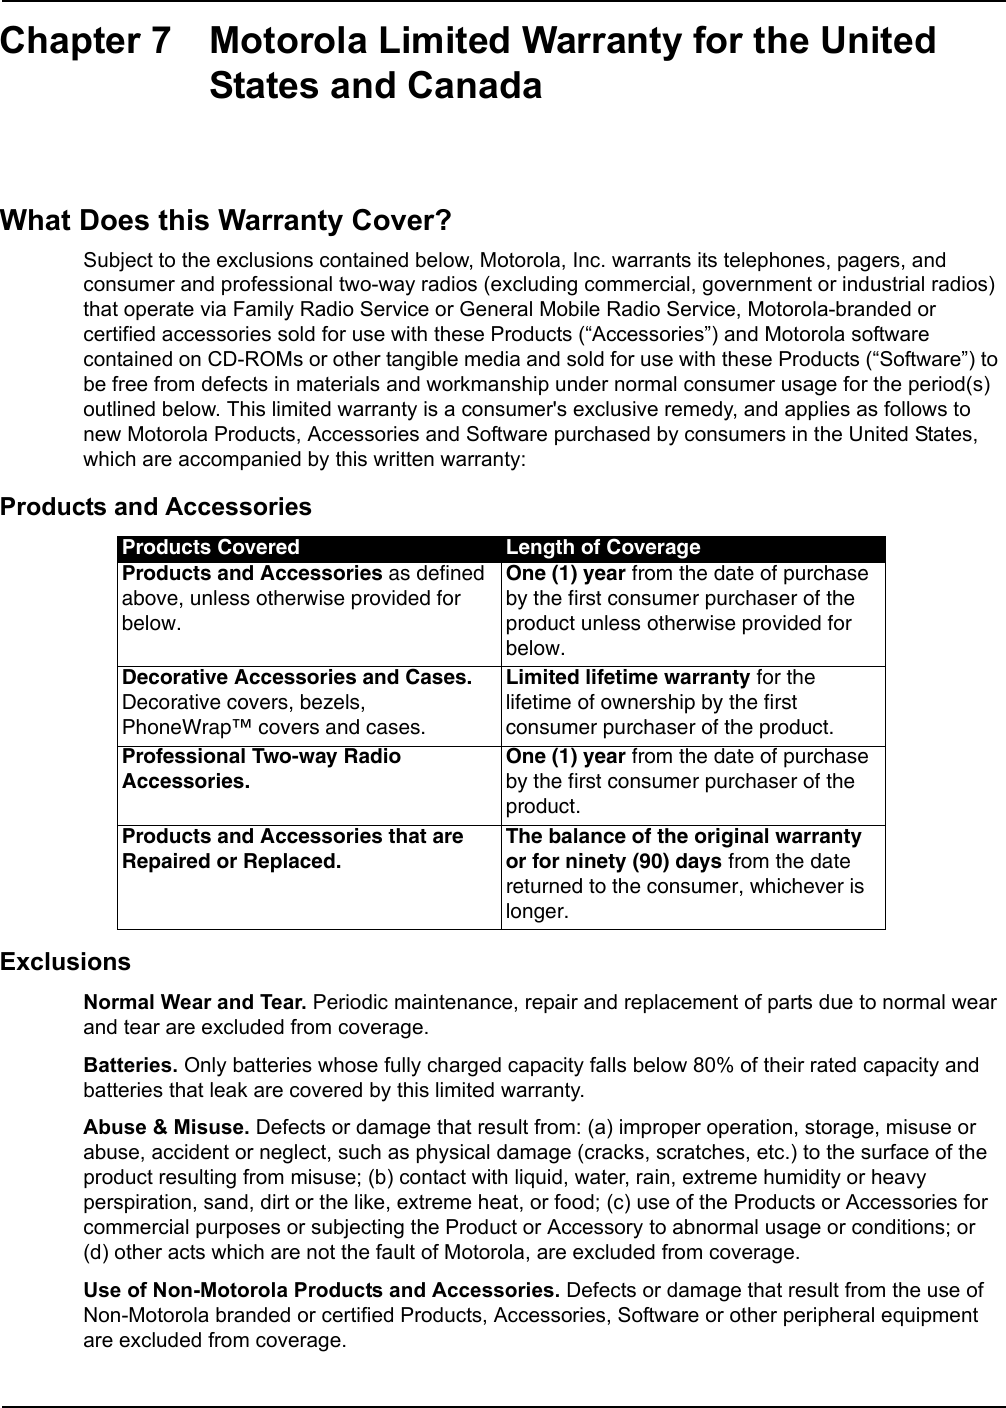 Chapter 7 Motorola Limited Warranty for the United States and CanadaWhat Does this Warranty Cover?Subject to the exclusions contained below, Motorola, Inc. warrants its telephones, pagers, and consumer and professional two-way radios (excluding commercial, government or industrial radios) that operate via Family Radio Service or General Mobile Radio Service, Motorola-branded or certified accessories sold for use with these Products (“Accessories”) and Motorola software contained on CD-ROMs or other tangible media and sold for use with these Products (“Software”) to be free from defects in materials and workmanship under normal consumer usage for the period(s) outlined below. This limited warranty is a consumer&apos;s exclusive remedy, and applies as follows to new Motorola Products, Accessories and Software purchased by consumers in the United States, which are accompanied by this written warranty:Products and AccessoriesExclusionsNormal Wear and Tear. Periodic maintenance, repair and replacement of parts due to normal wear and tear are excluded from coverage.Batteries. Only batteries whose fully charged capacity falls below 80% of their rated capacity and batteries that leak are covered by this limited warranty.Abuse &amp; Misuse. Defects or damage that result from: (a) improper operation, storage, misuse or abuse, accident or neglect, such as physical damage (cracks, scratches, etc.) to the surface of the product resulting from misuse; (b) contact with liquid, water, rain, extreme humidity or heavy perspiration, sand, dirt or the like, extreme heat, or food; (c) use of the Products or Accessories for commercial purposes or subjecting the Product or Accessory to abnormal usage or conditions; or (d) other acts which are not the fault of Motorola, are excluded from coverage.Use of Non-Motorola Products and Accessories. Defects or damage that result from the use of Non-Motorola branded or certified Products, Accessories, Software or other peripheral equipment are excluded from coverage.Products Covered Length of CoverageProducts and Accessories as defined above, unless otherwise provided for below.One (1) year from the date of purchase by the first consumer purchaser of the product unless otherwise provided for below.Decorative Accessories and Cases. Decorative covers, bezels, PhoneWrap™ covers and cases.Limited lifetime warranty for the lifetime of ownership by the first consumer purchaser of the product.Professional Two-way Radio Accessories.One (1) year from the date of purchase by the first consumer purchaser of the product.Products and Accessories that are Repaired or Replaced.The balance of the original warranty or for ninety (90) days from the date returned to the consumer, whichever is longer.